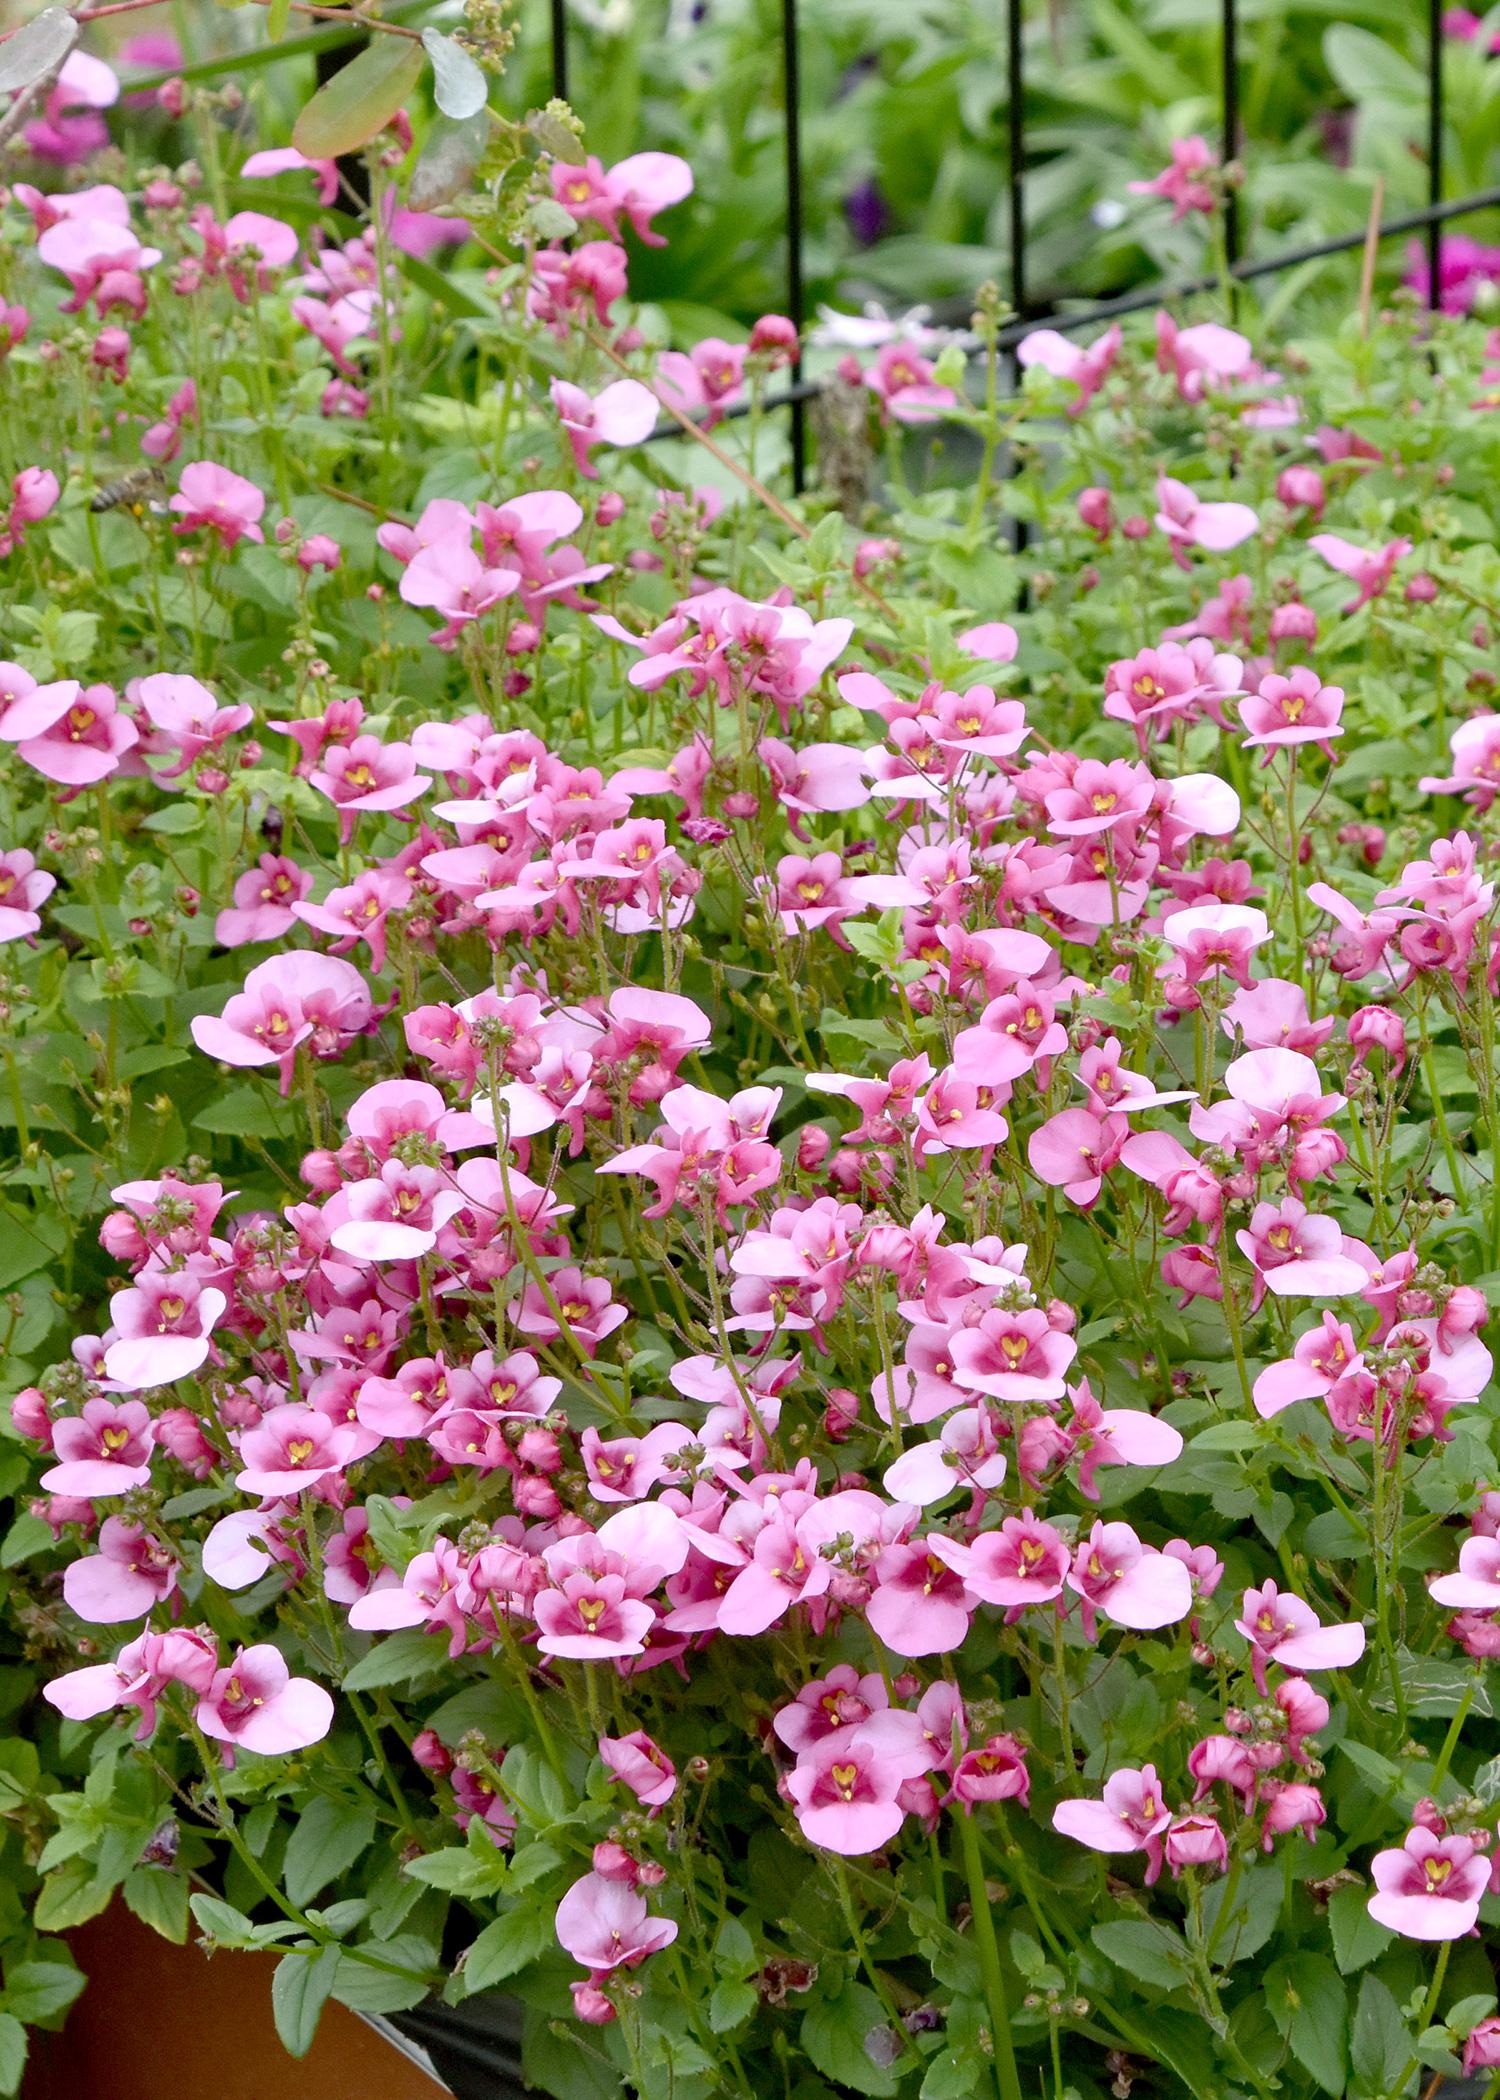 Diascias are cheerful plants that produce loads of delicate flowers that cover mounding foliage. This bright pink Diascia will bloom prolifically as long as temperatures are mild. (Photo by MSU Extension/Gary Bachman)